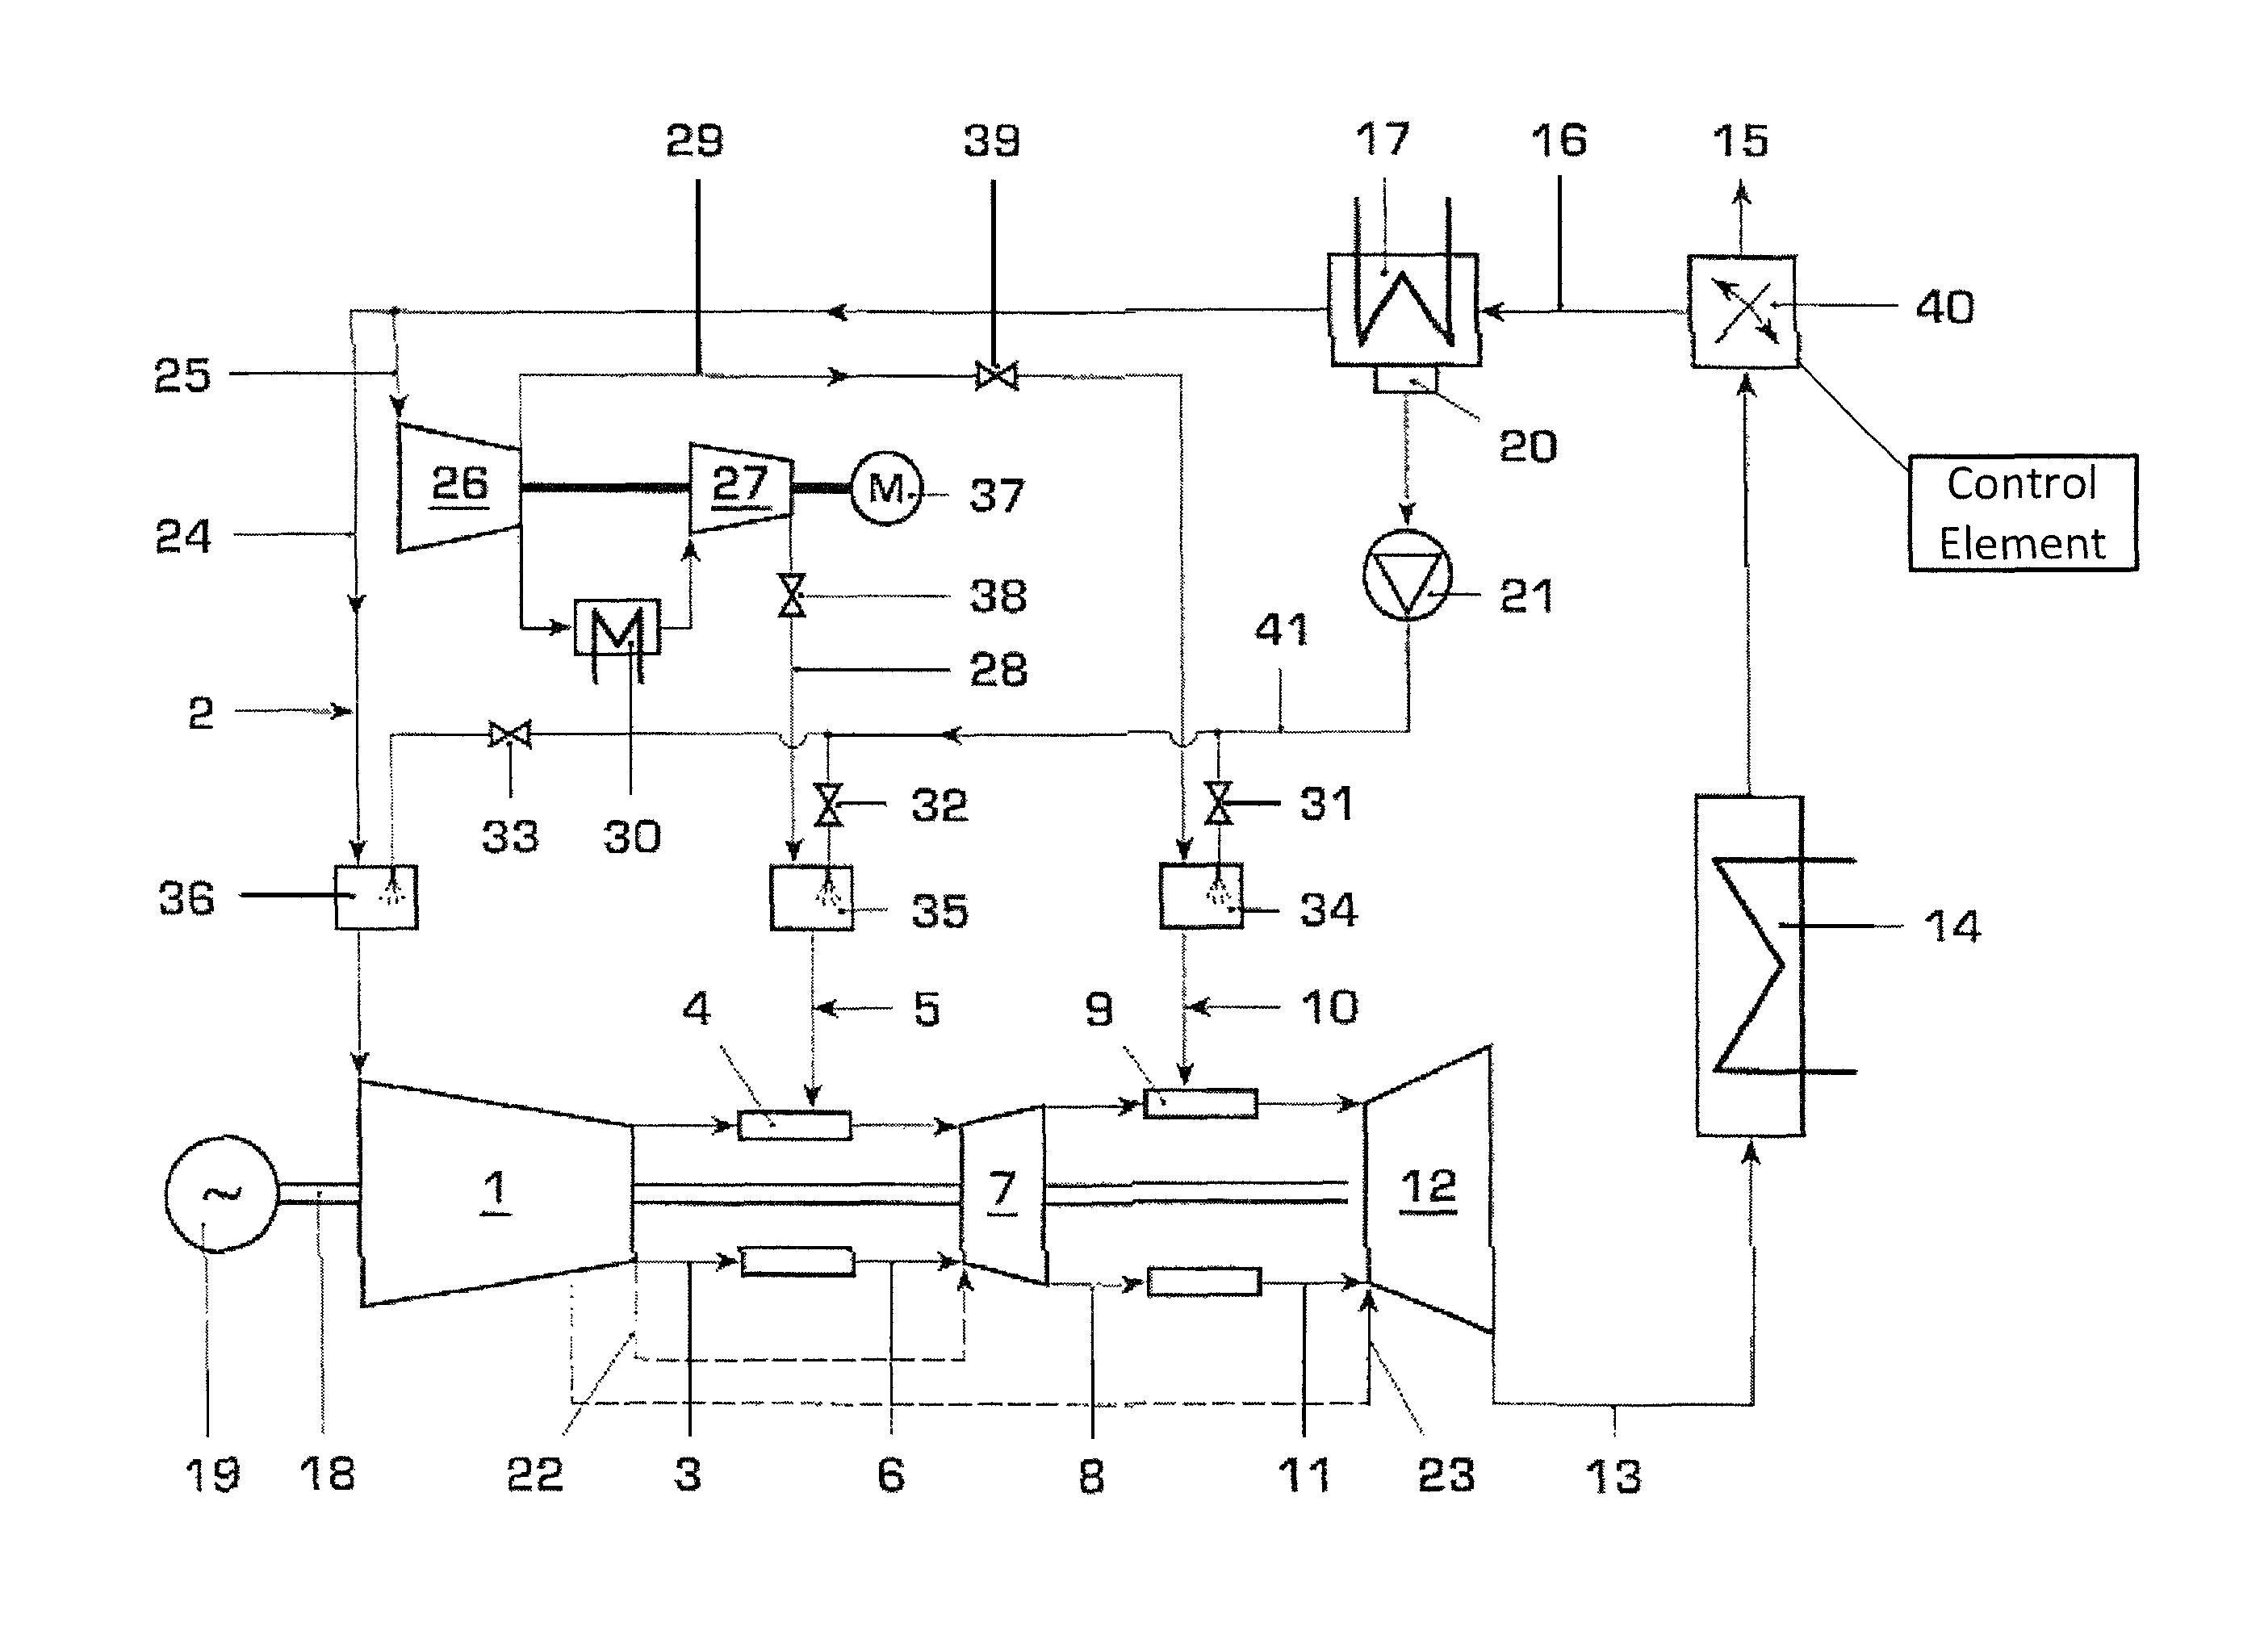 Gas turbine installation with flue gas recirculation dependent on oxygen content of a gas flow